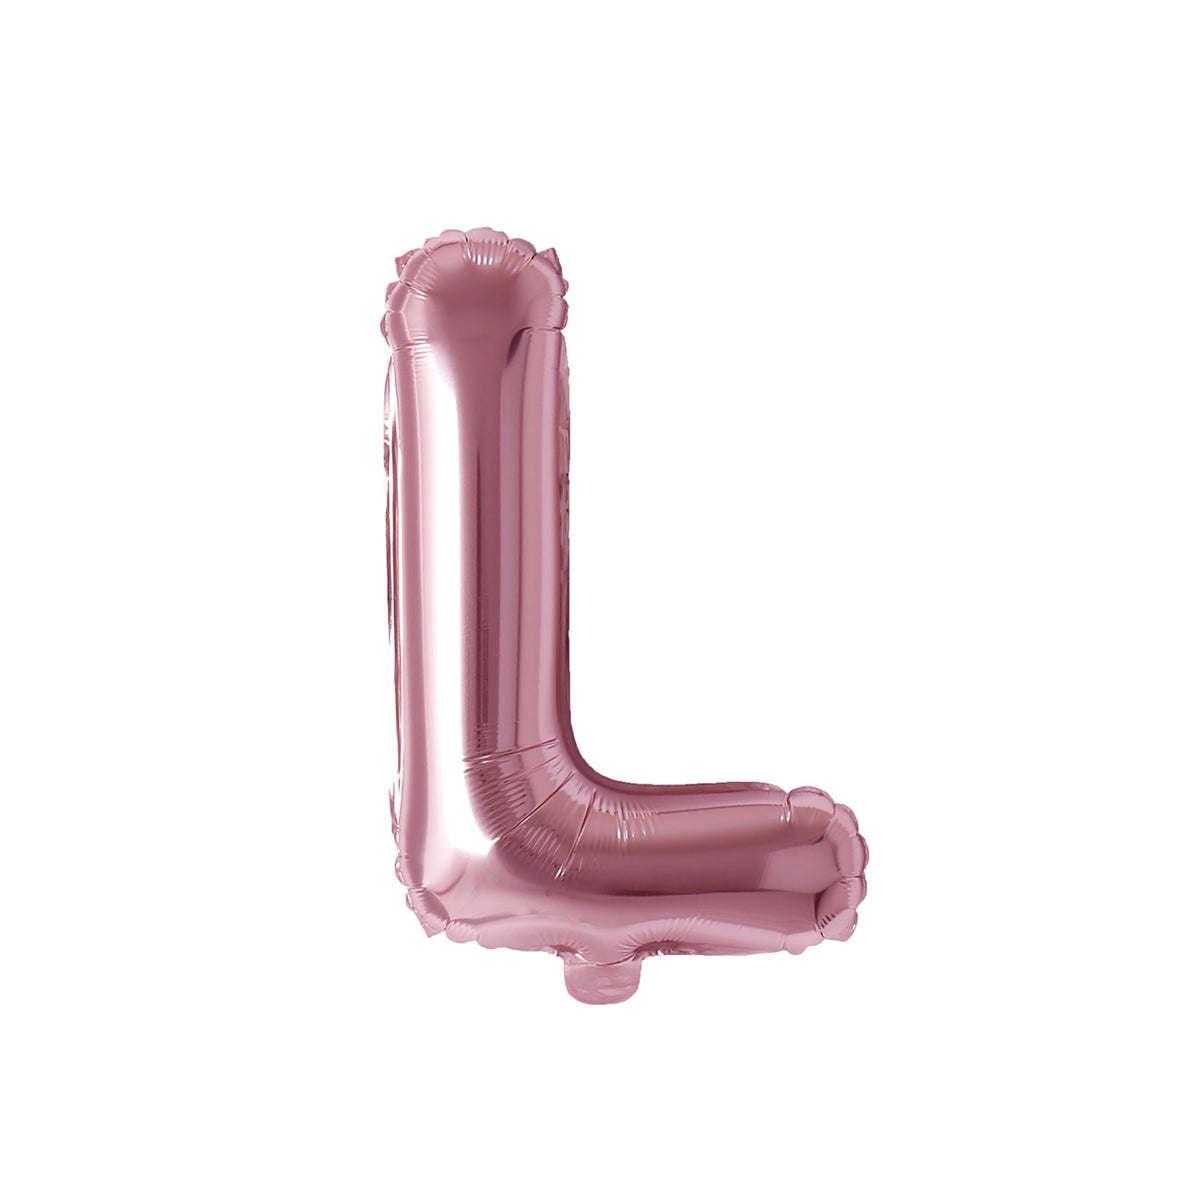 PARTY EXPERT Balloons Rose Gold Letter L Foil Balloon, 16 Inches, 1 Count 810064194306